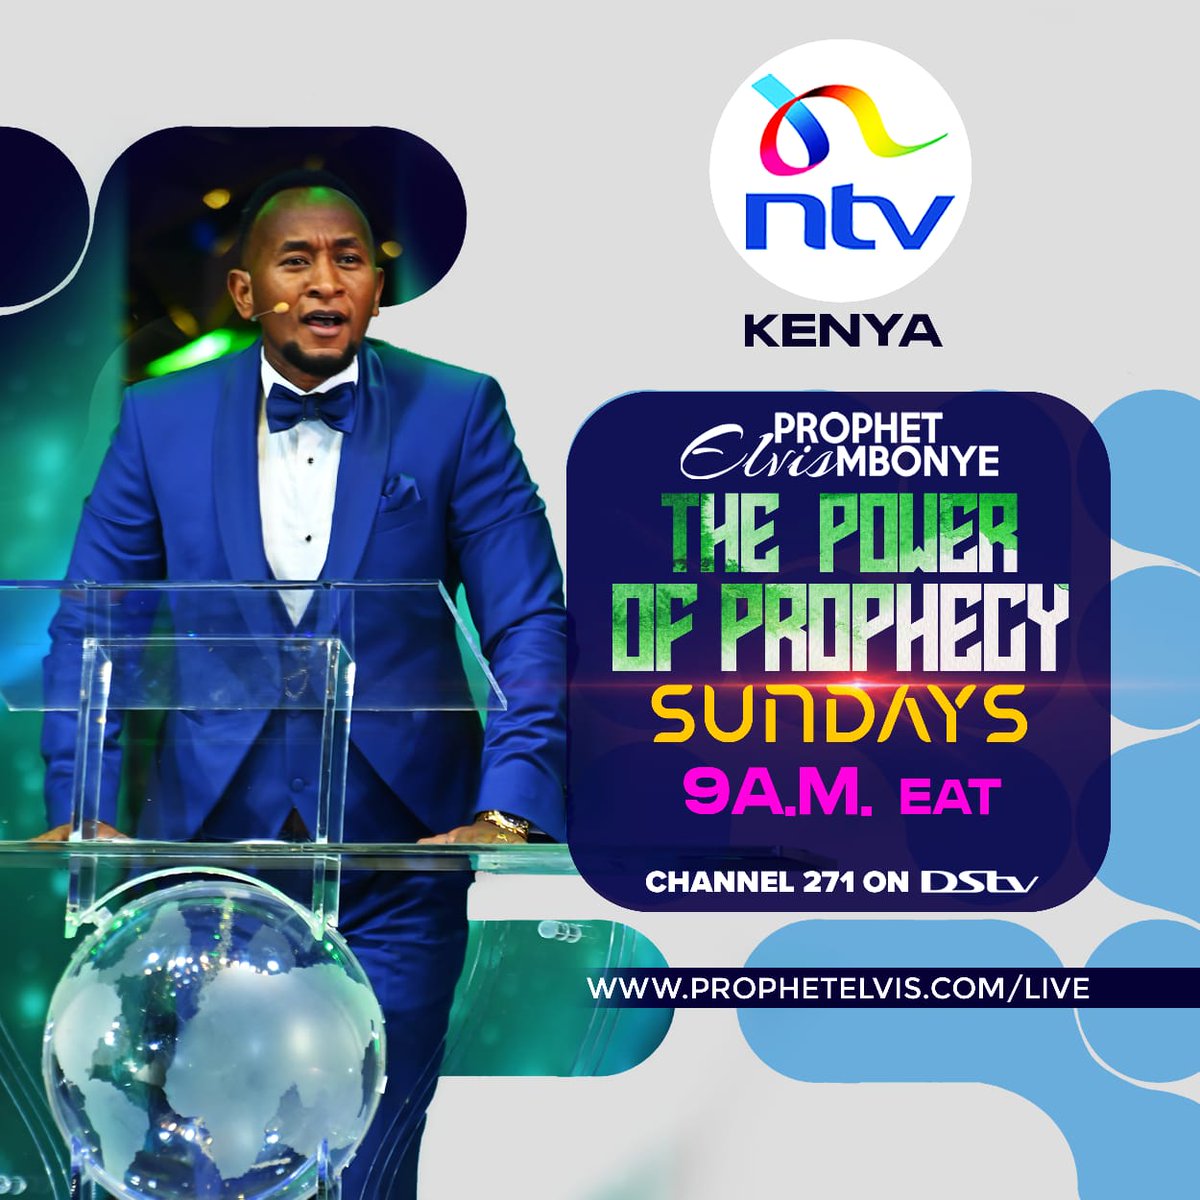 Tune in to NTV Kenya this Sunday at 9:00 A.M. for a captivating episode of 'The Power of Prophecy' by Prophet Elvis Mbonye. #ThePowerofProphecy